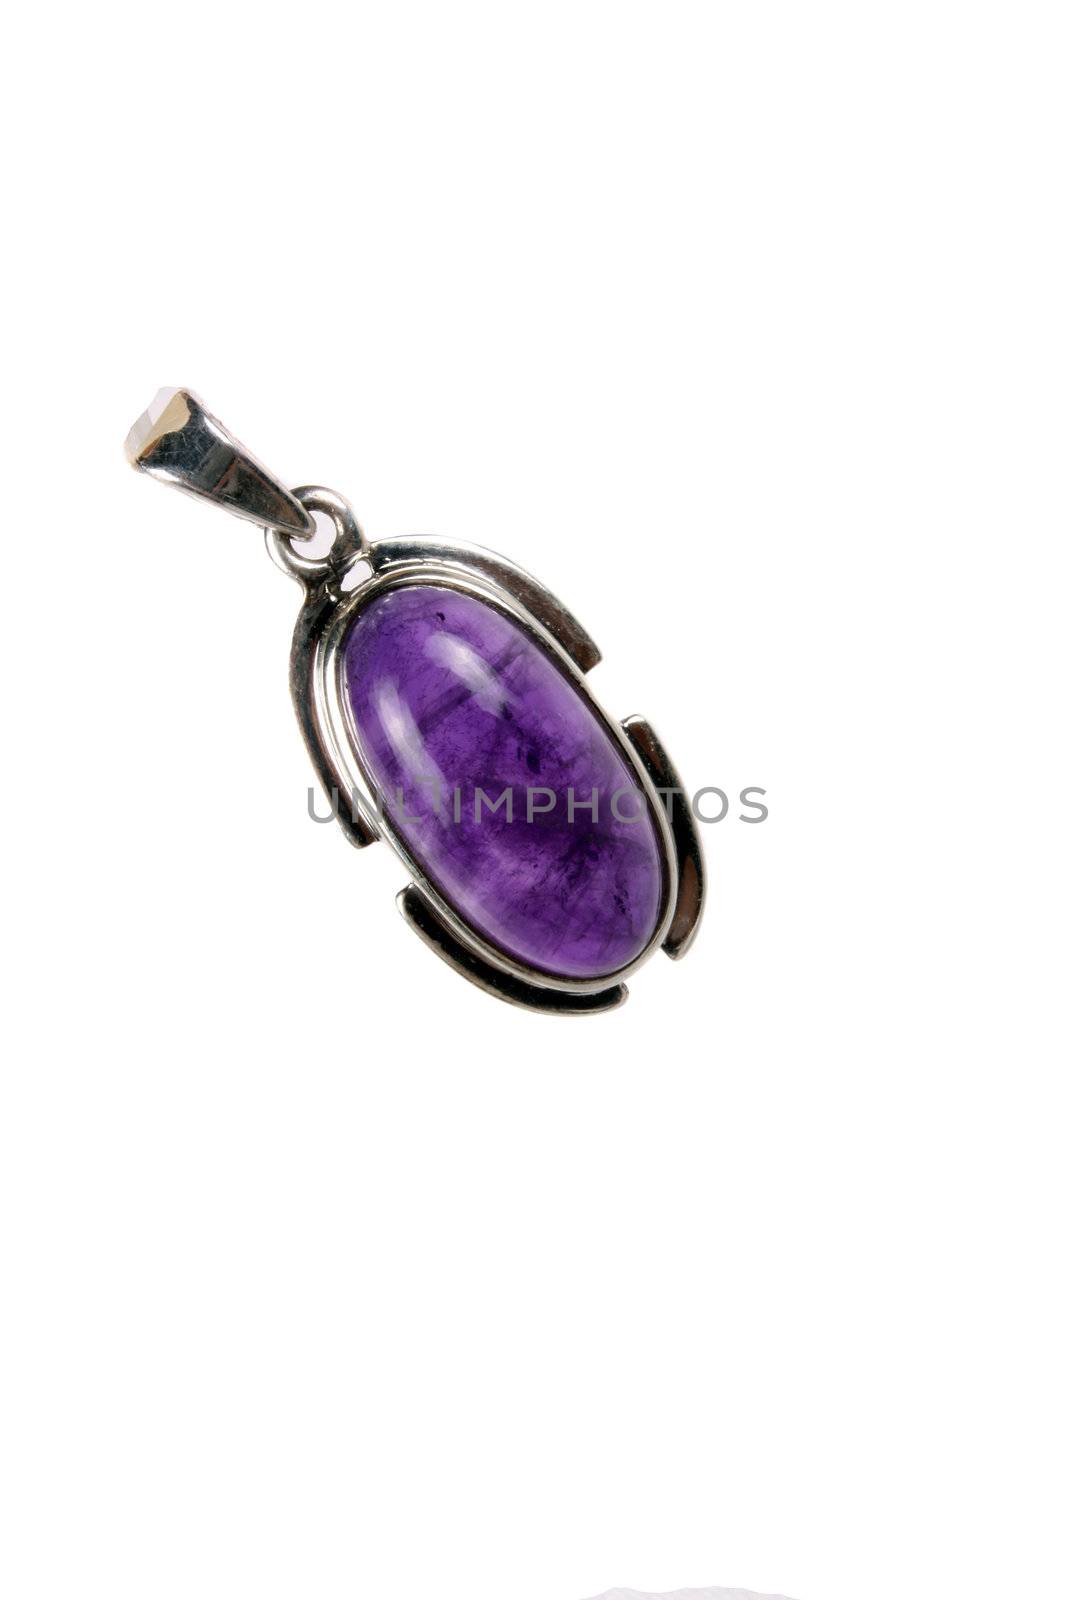 A beautiful silver pendant with an amethyst gemstone used as fashion accessory as well as an alternative healing method in astrology, isolated on white studio background.